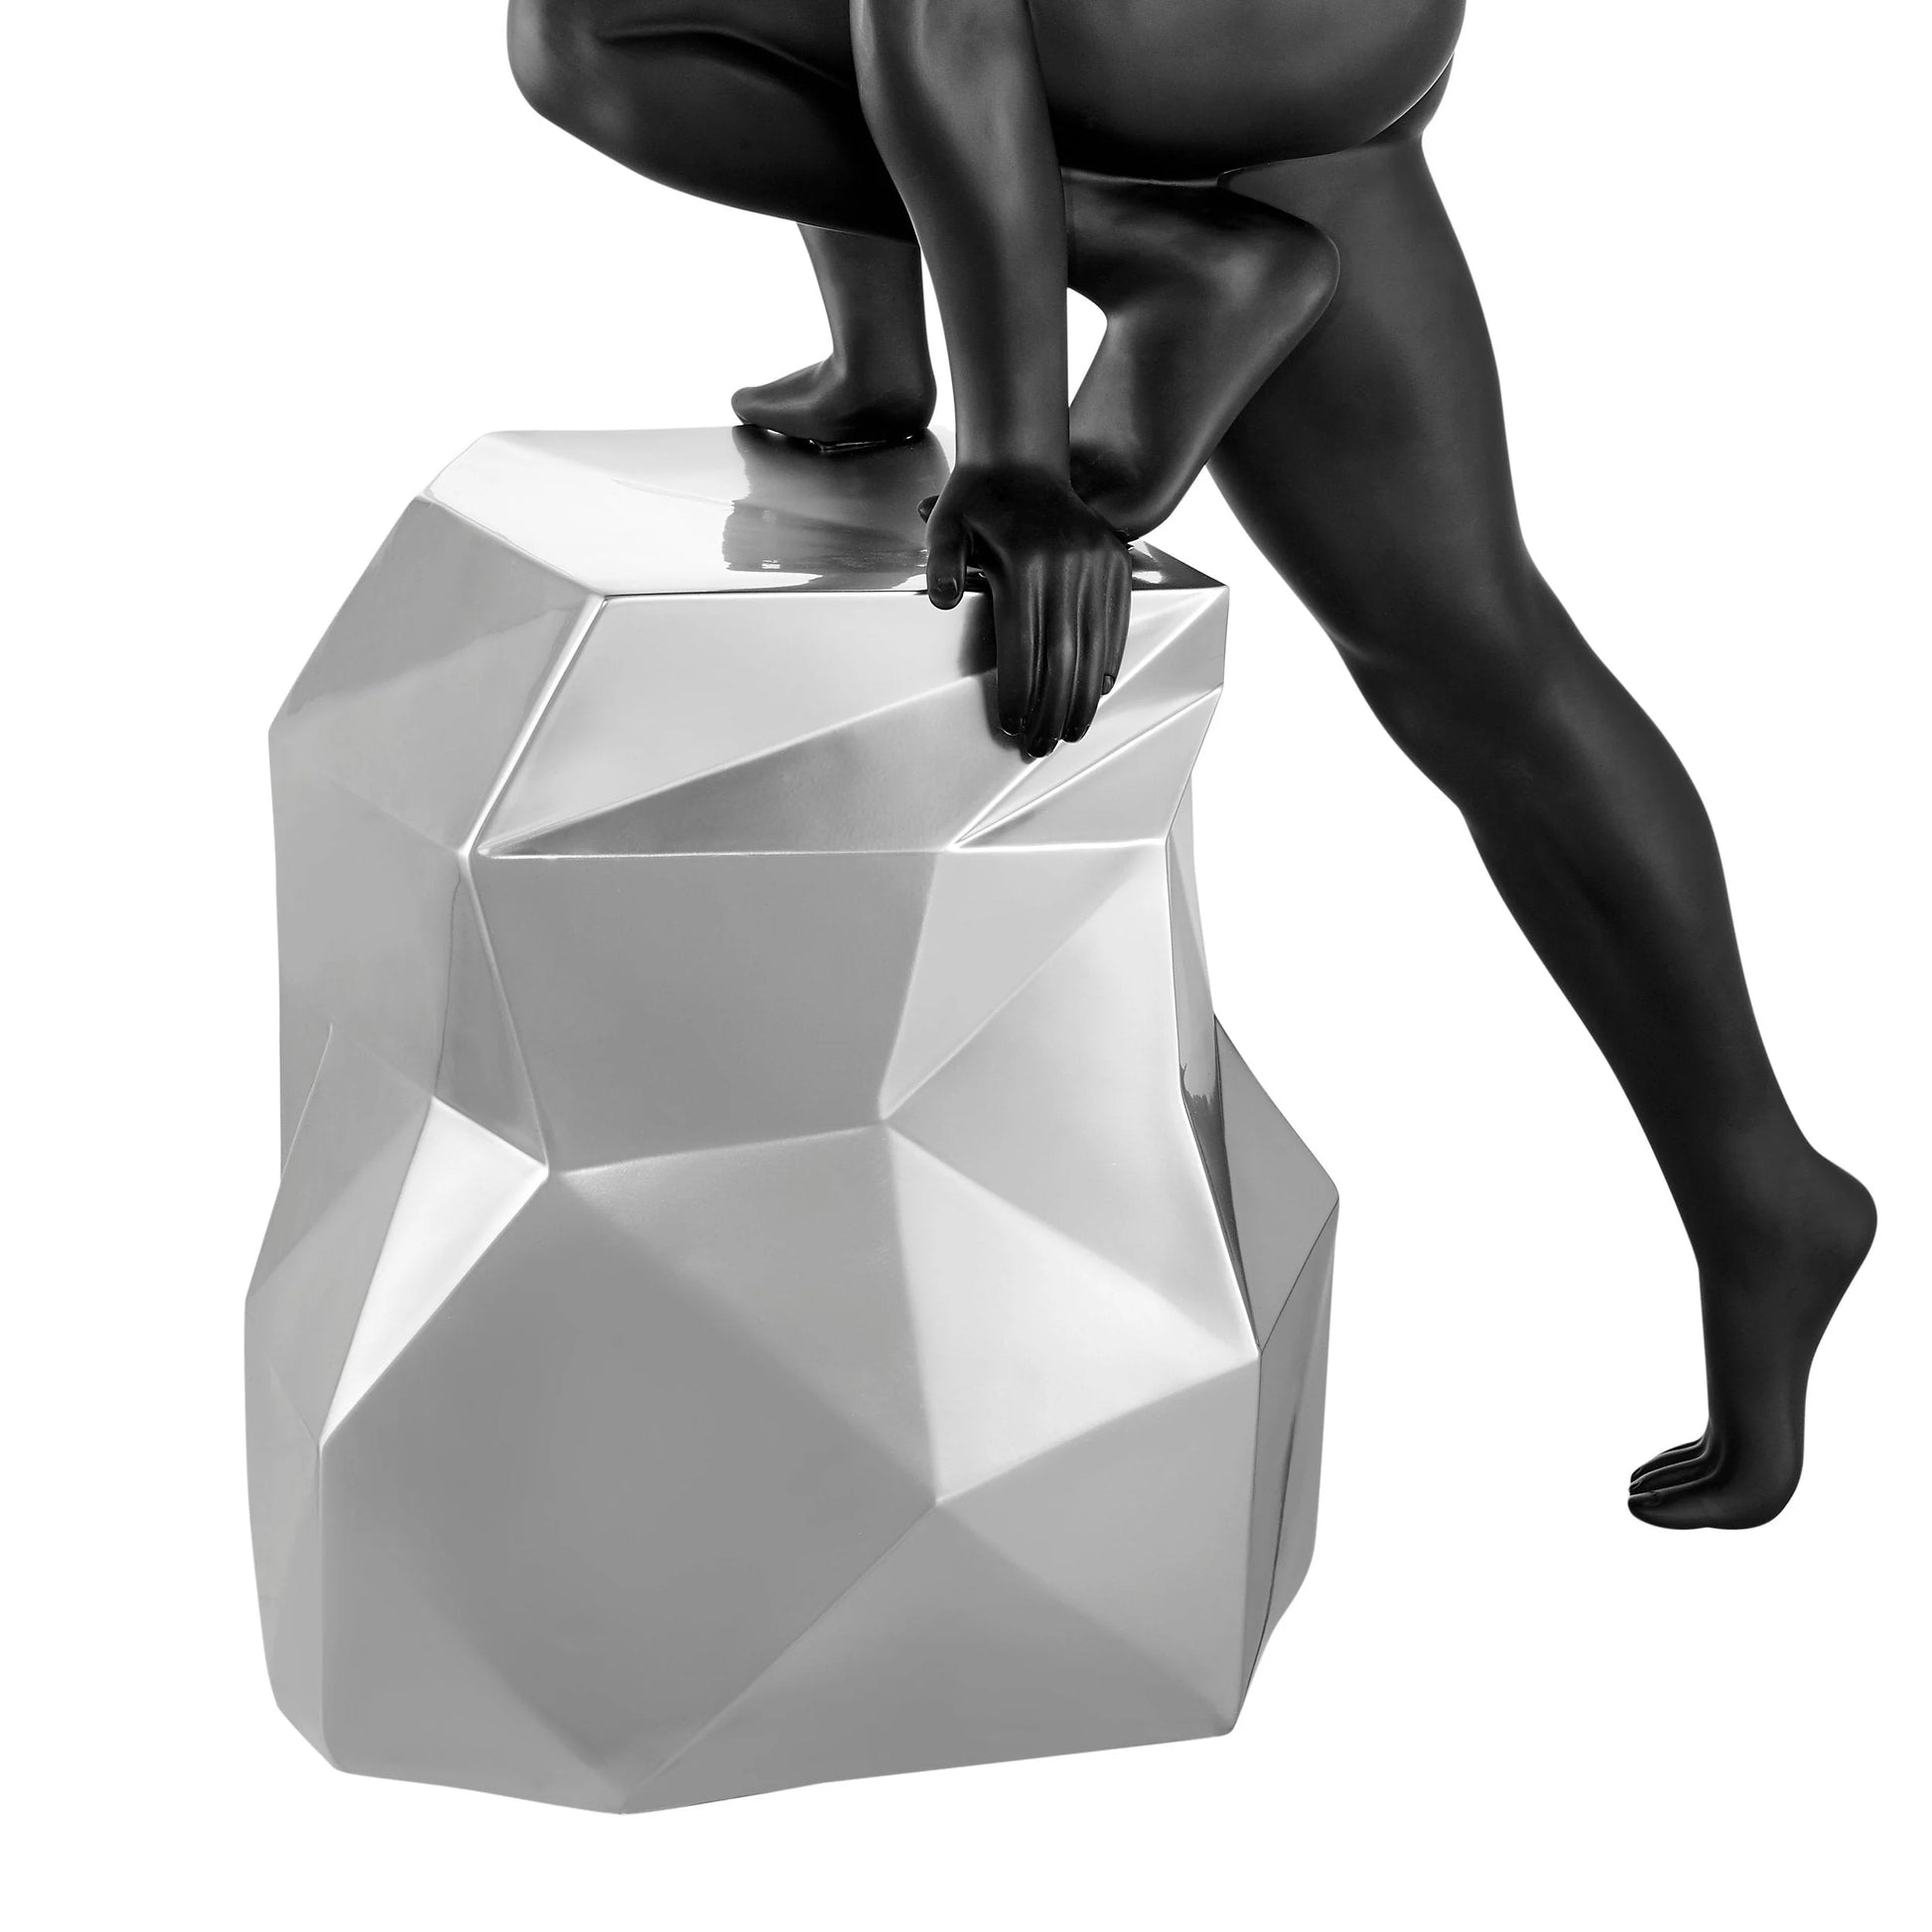 Sensuality Man Sculpture in Matte Black and Chrome 4